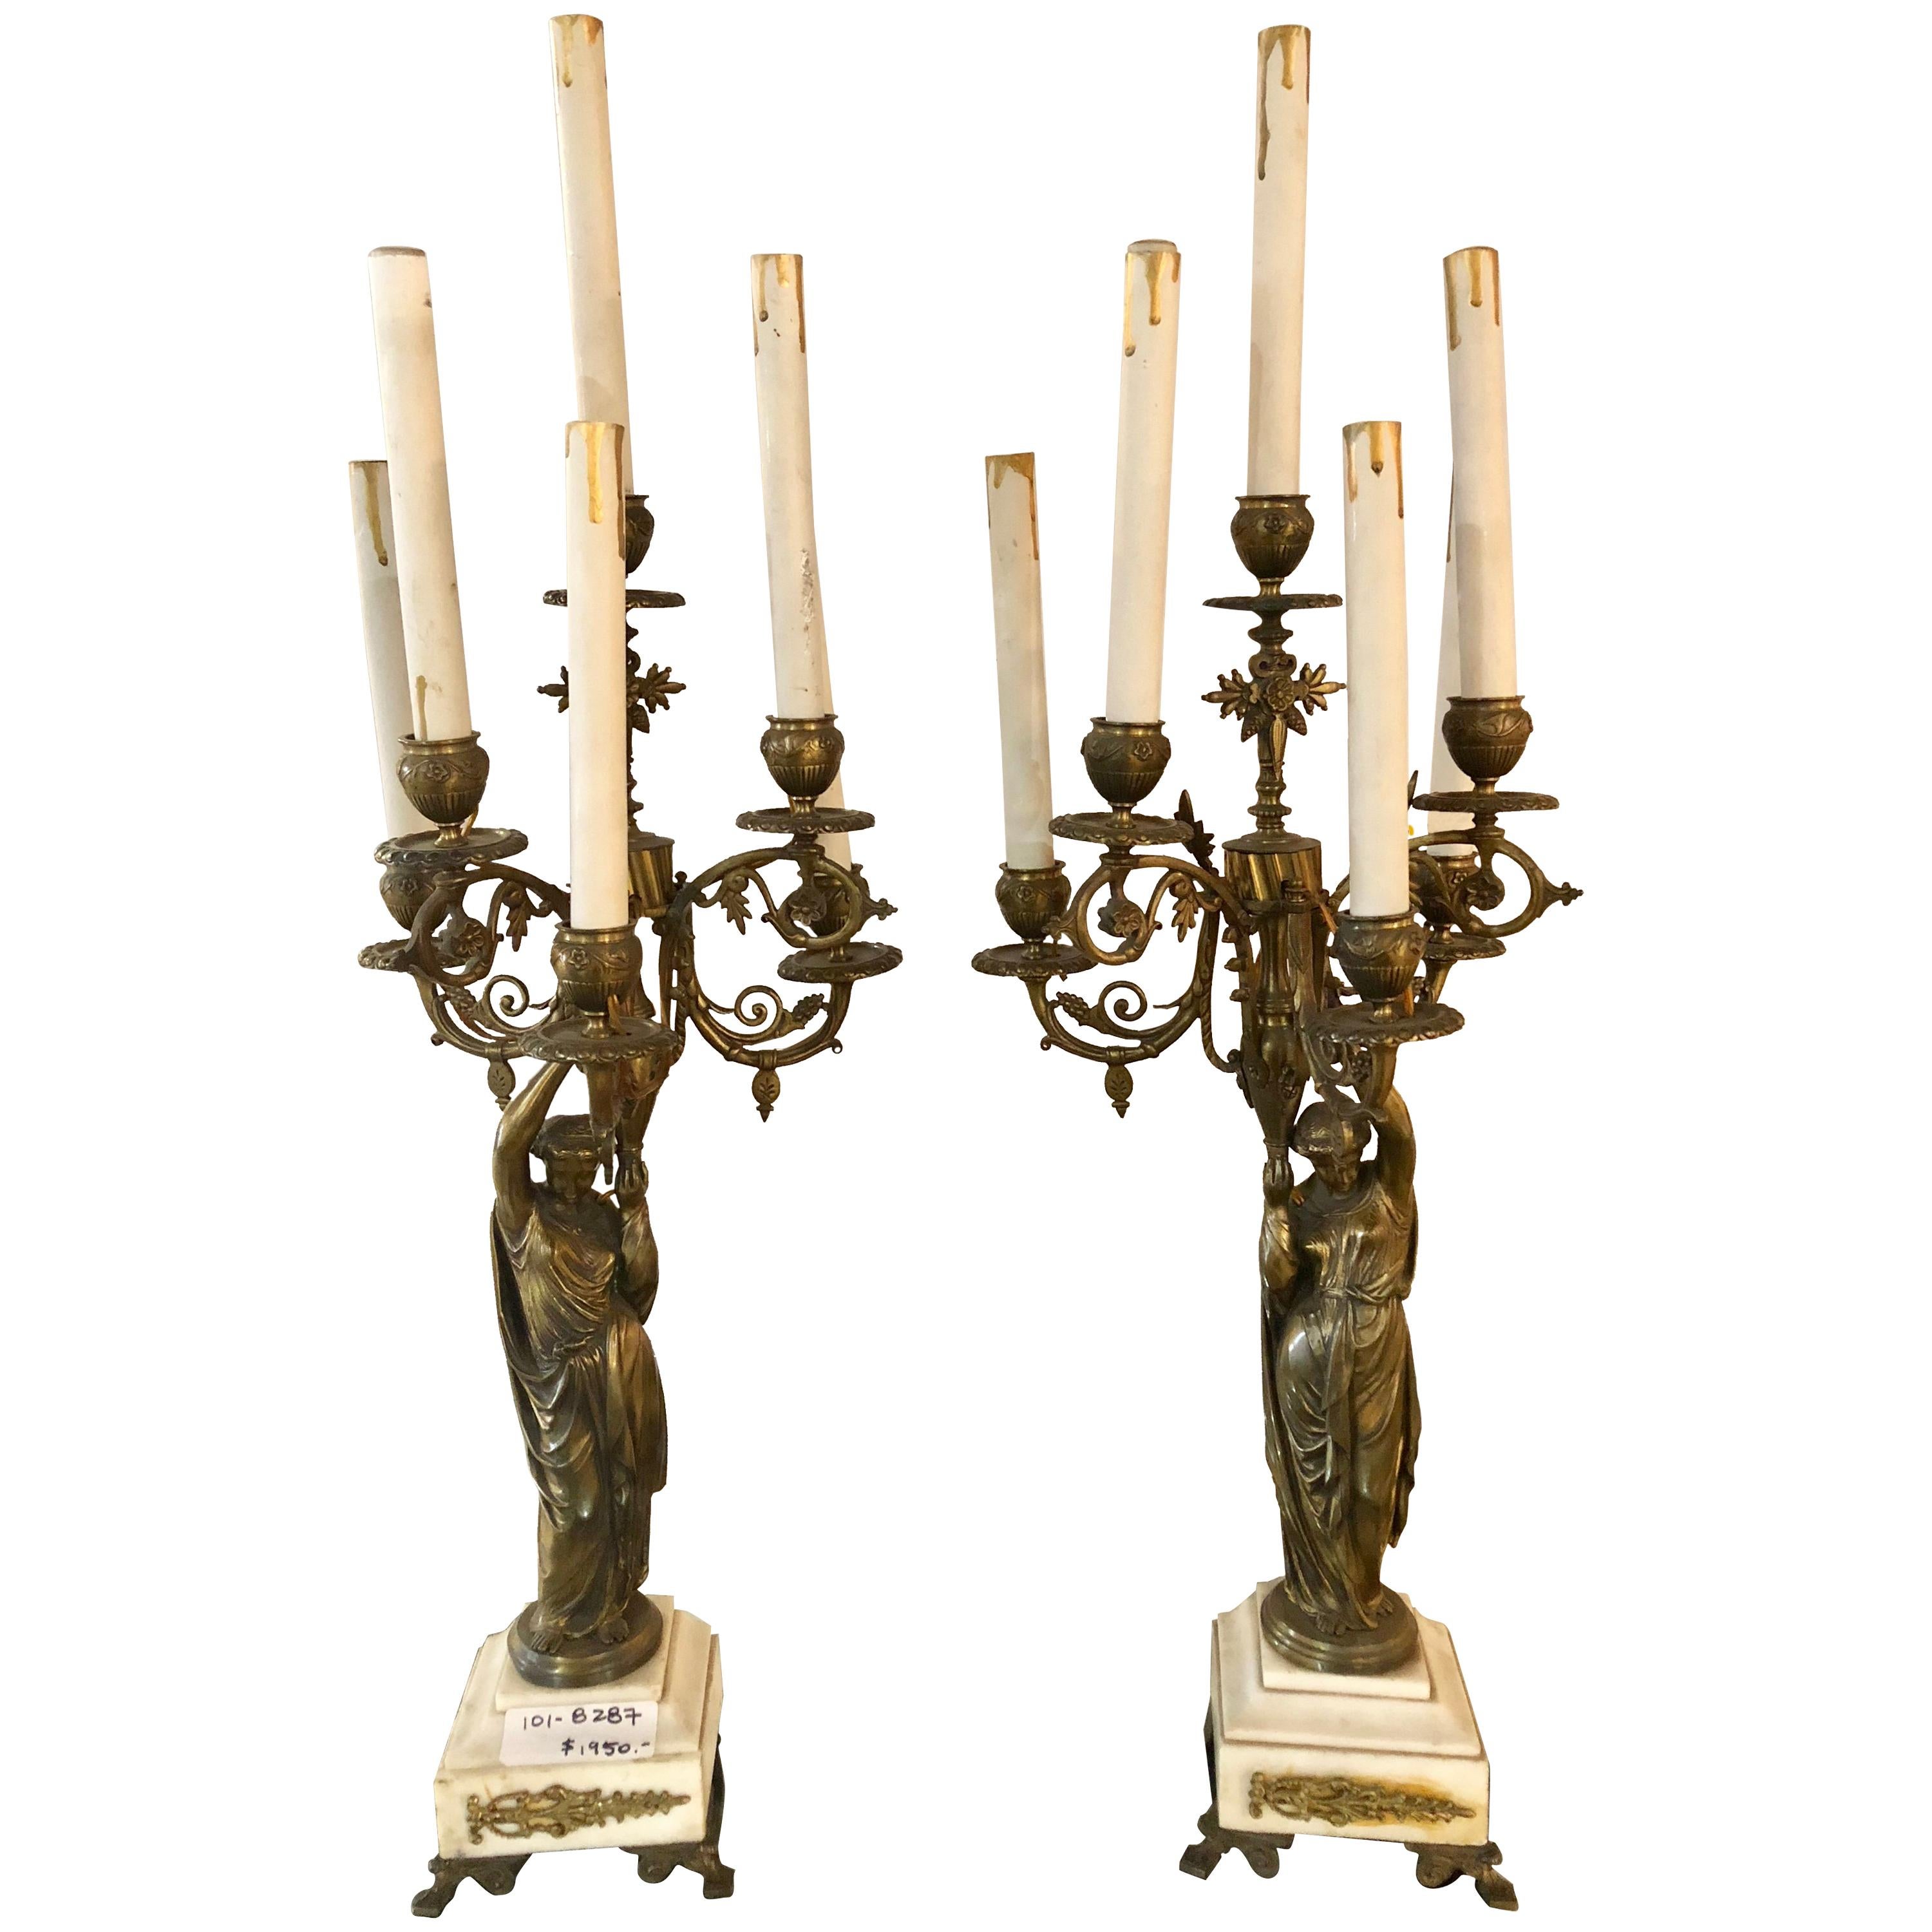 Pair of 19th Century Neoclassical Style Figural Bronze Candelabras